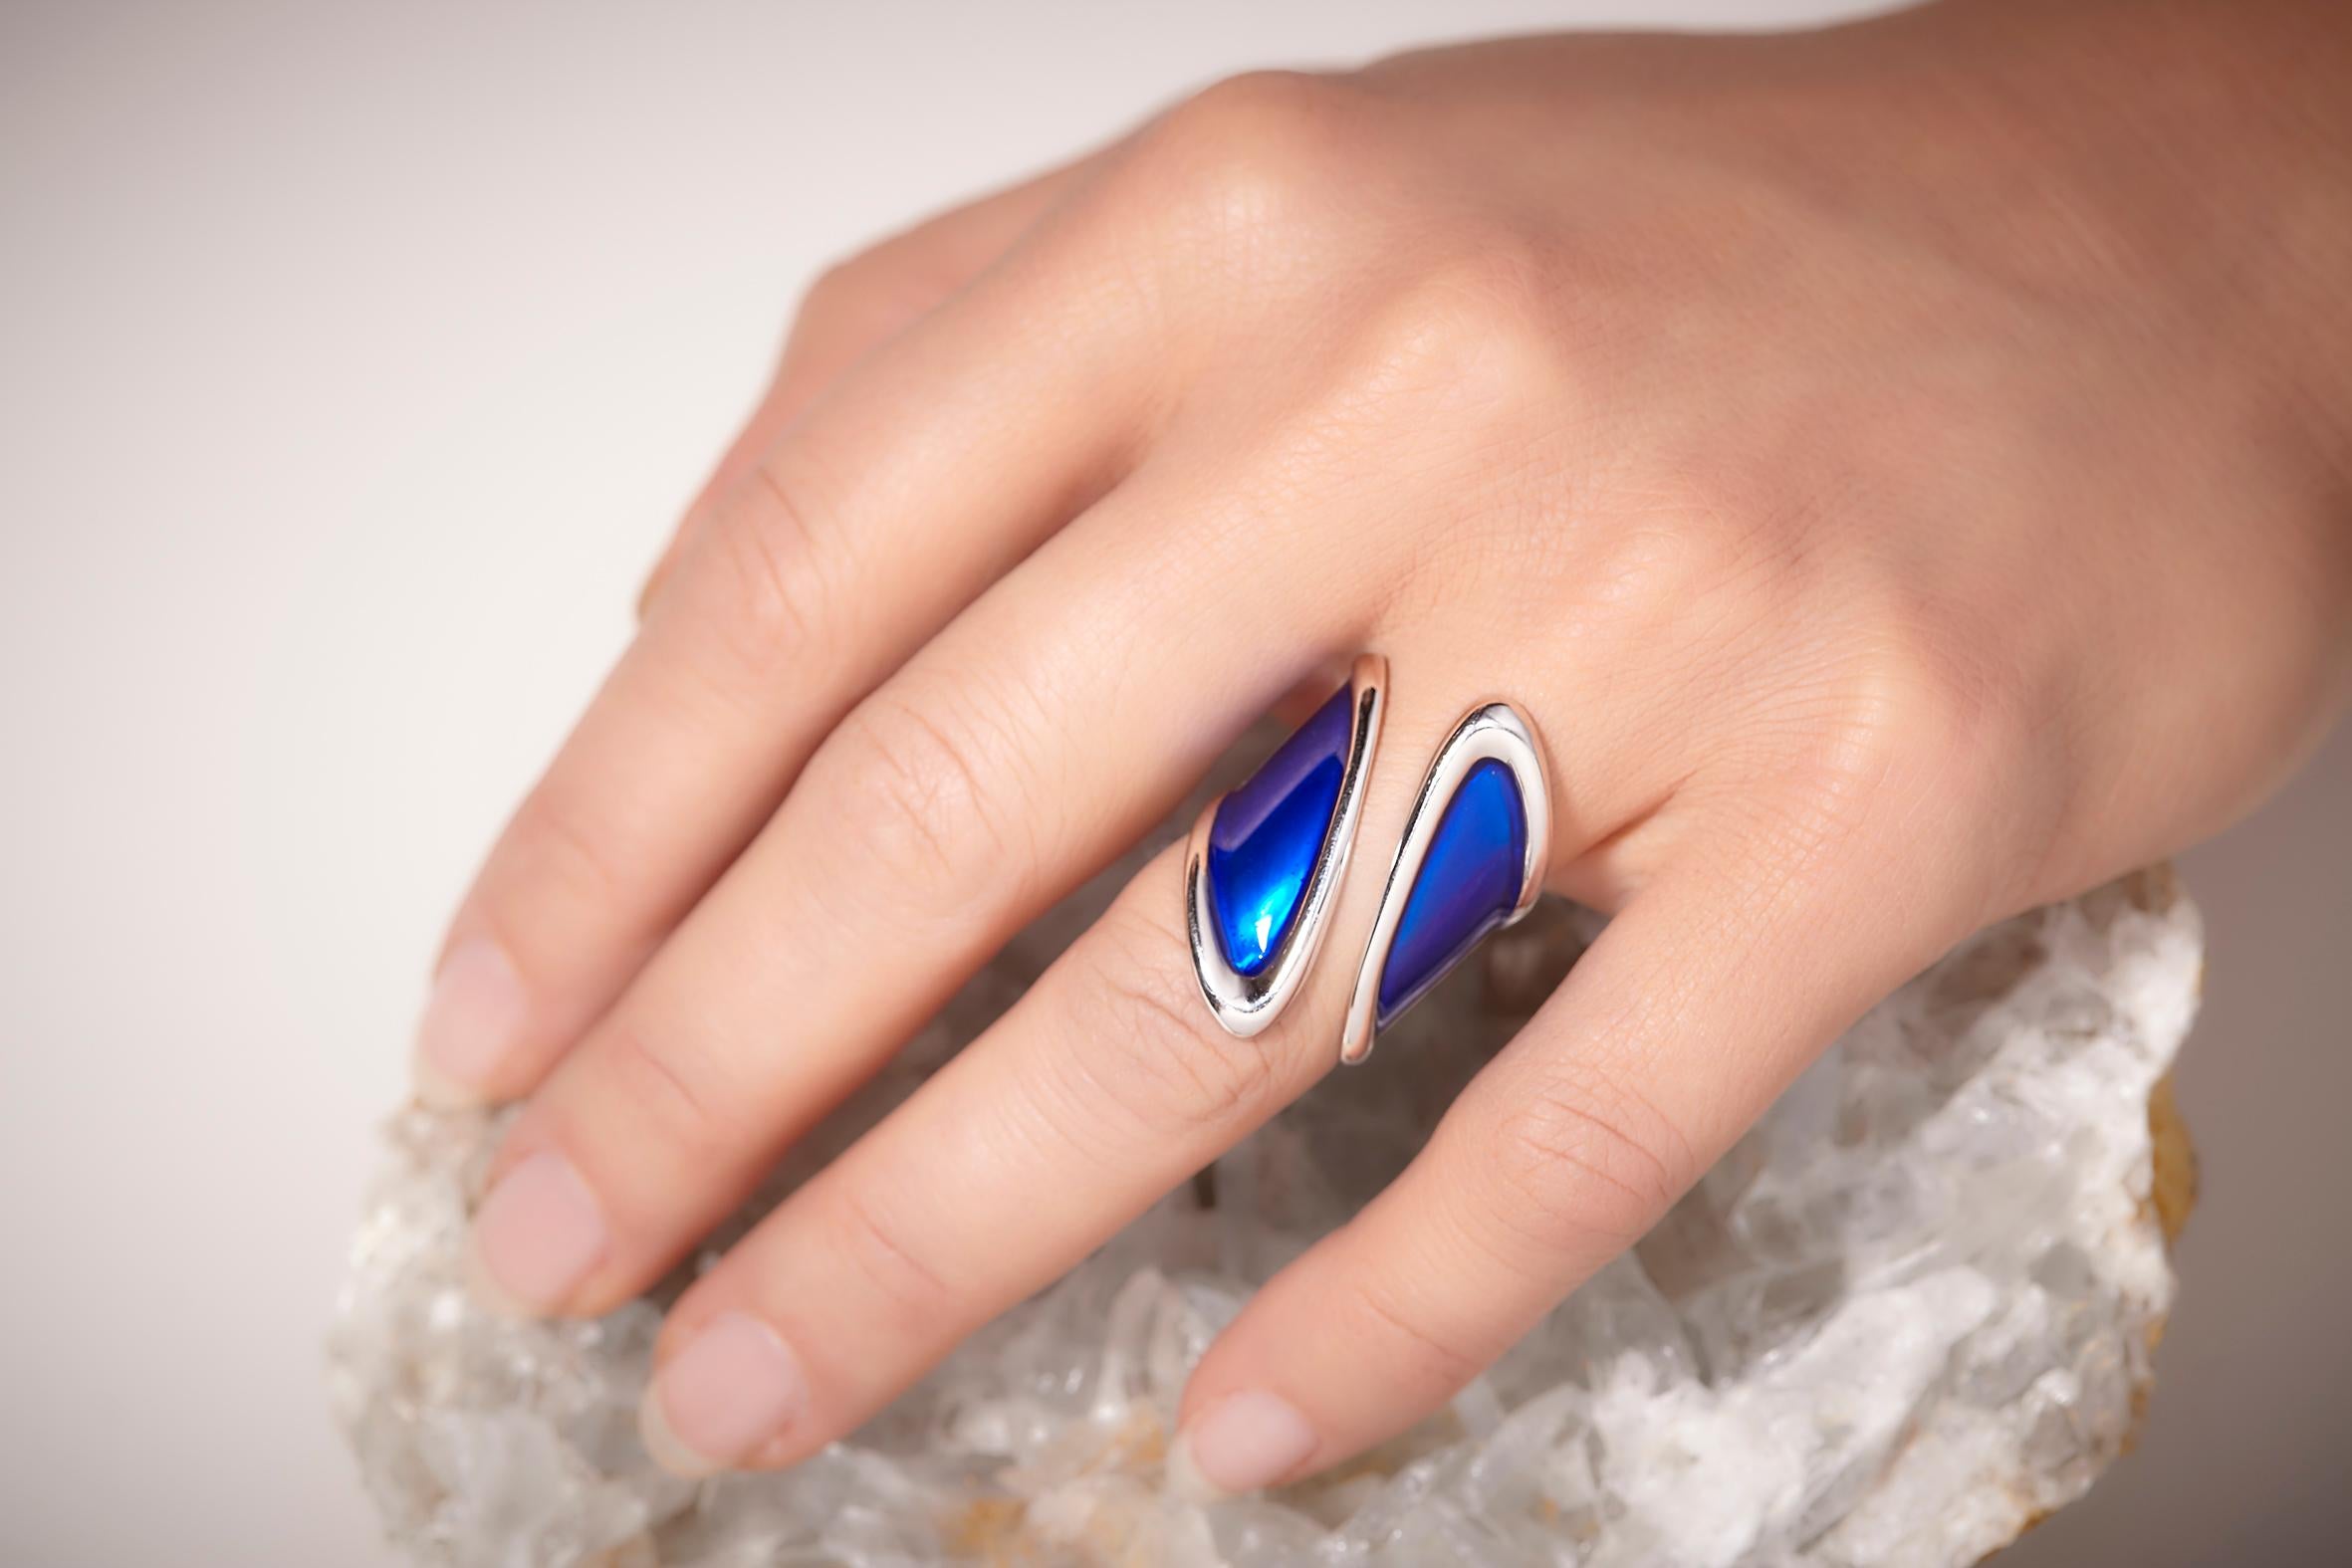 18K White Gold Cosmic Design Blue Enamel Gemini Beatrice Barzaghi Cocktail Ring.
Its cosmic lines emit vibrations that connect us to our divine essence, to our ultimate purpose. The Gemini cocktail ring is made of 18 karat white gold and features a